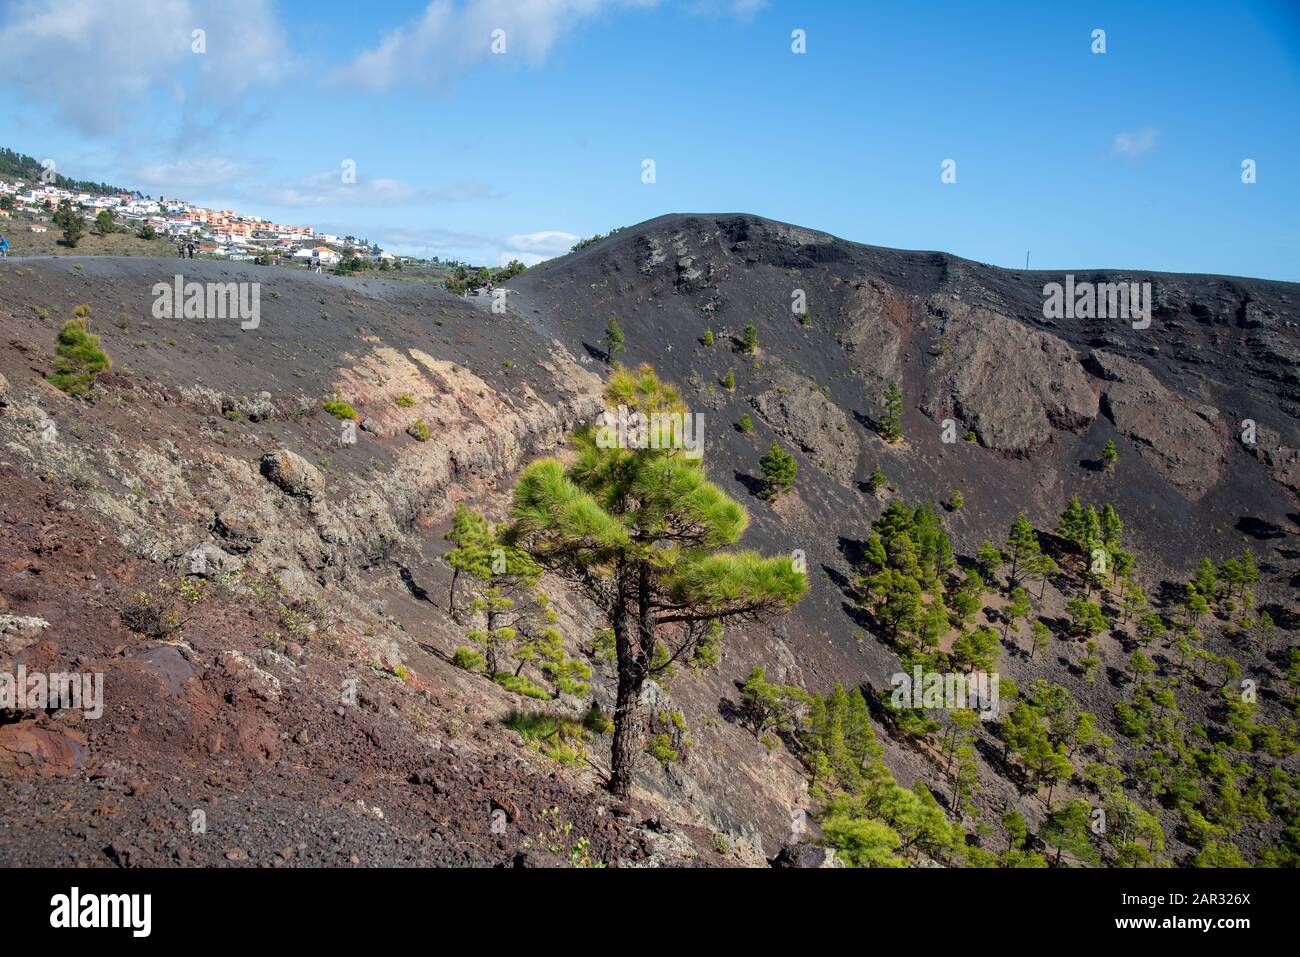 landscape near Fuencaliente in the southern tip of La Palma, Canary island, Spain Stock Photo